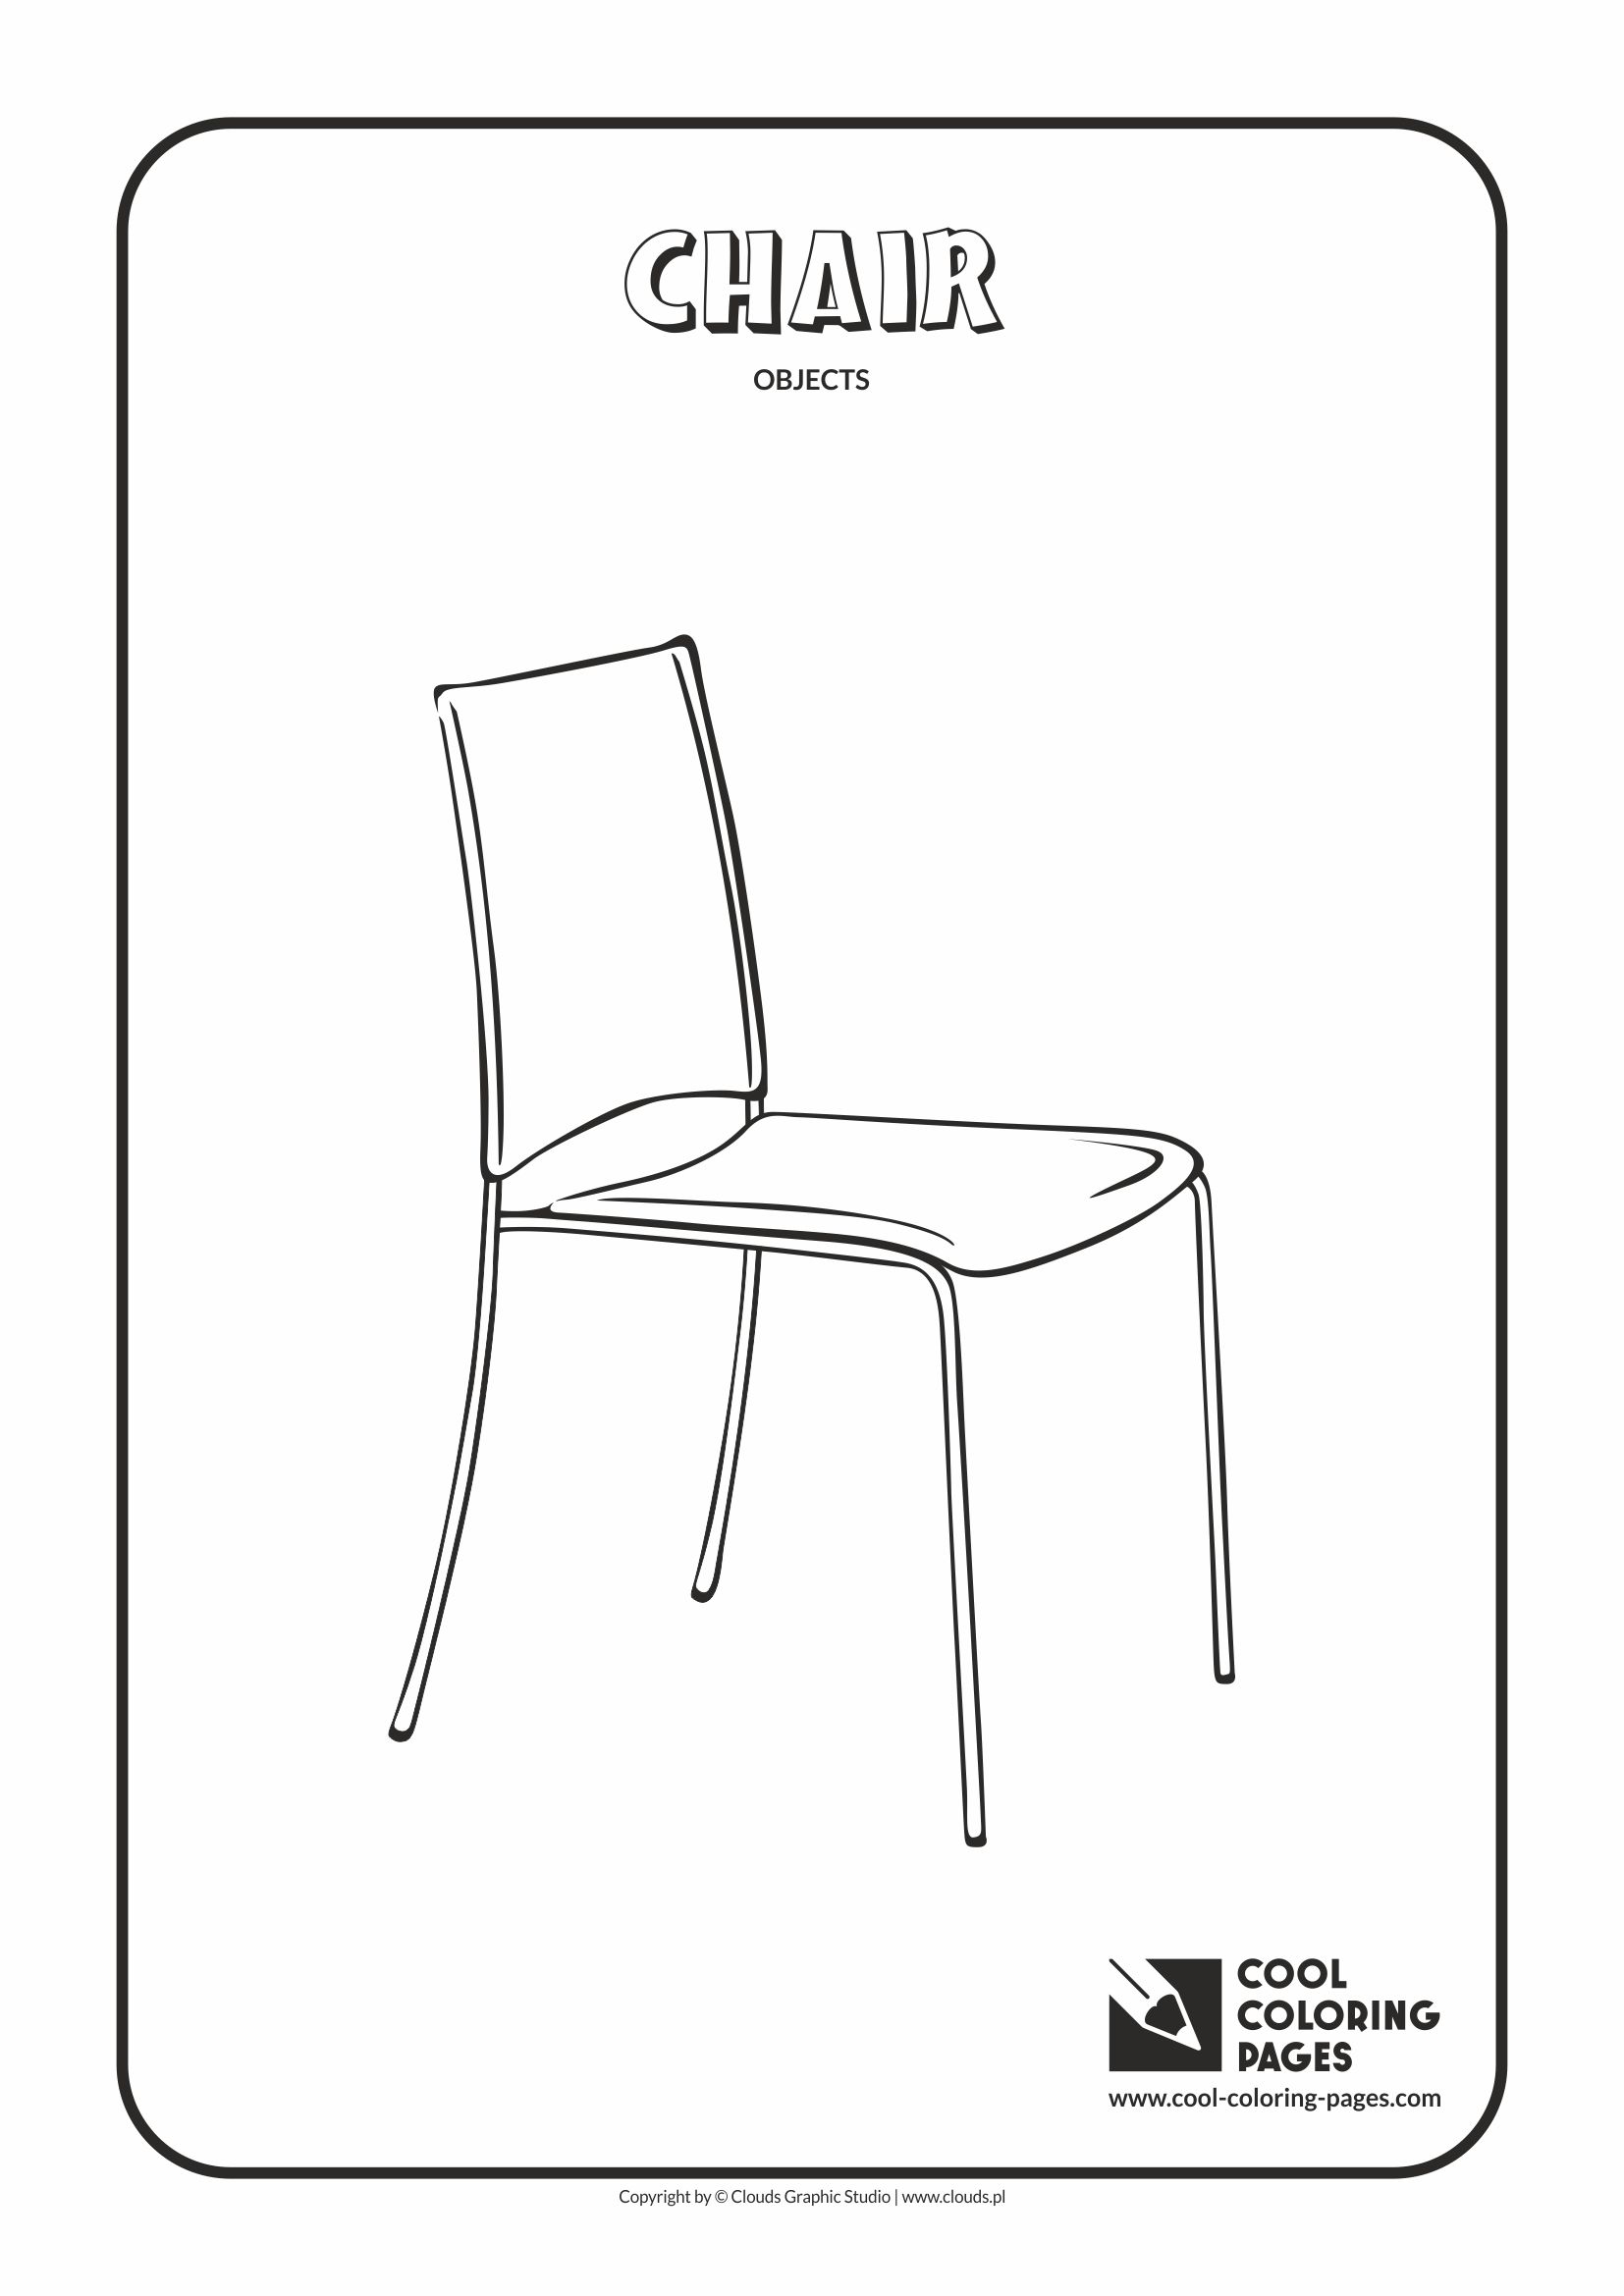 Cool Coloring Pages - Coloring objects / Chair